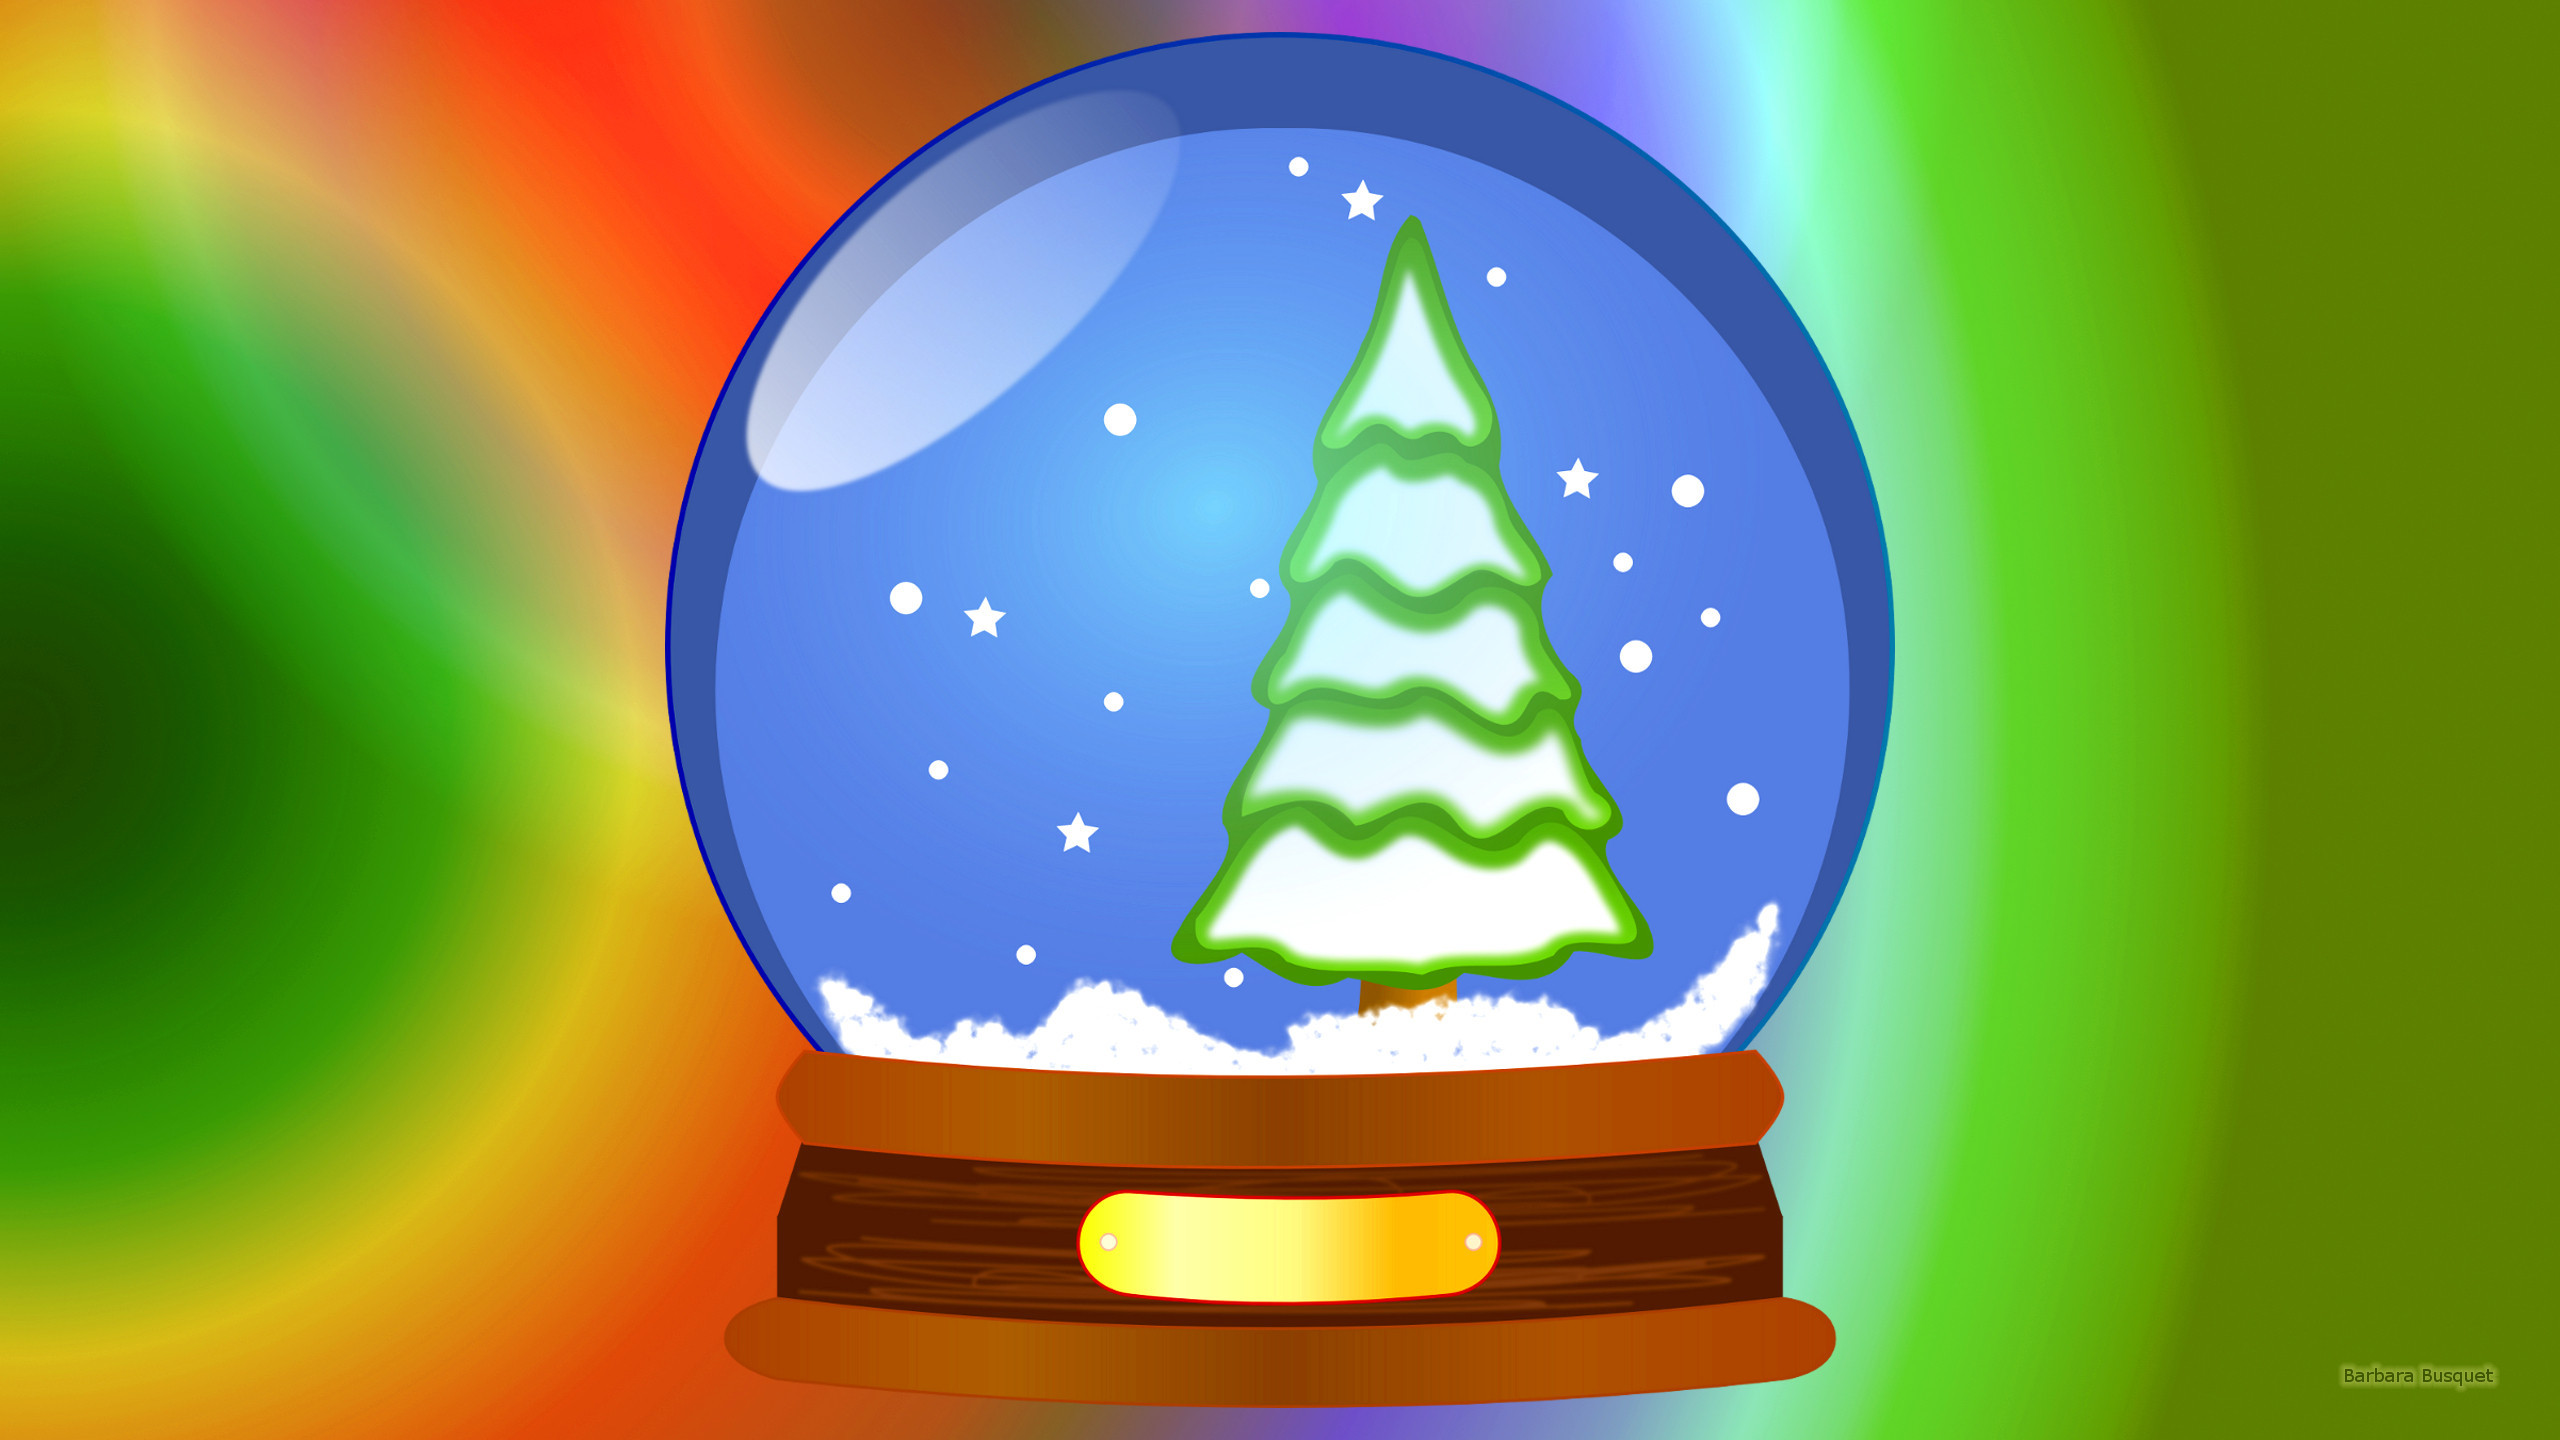 2560x1440 Christmas wallpaper with a snow globe